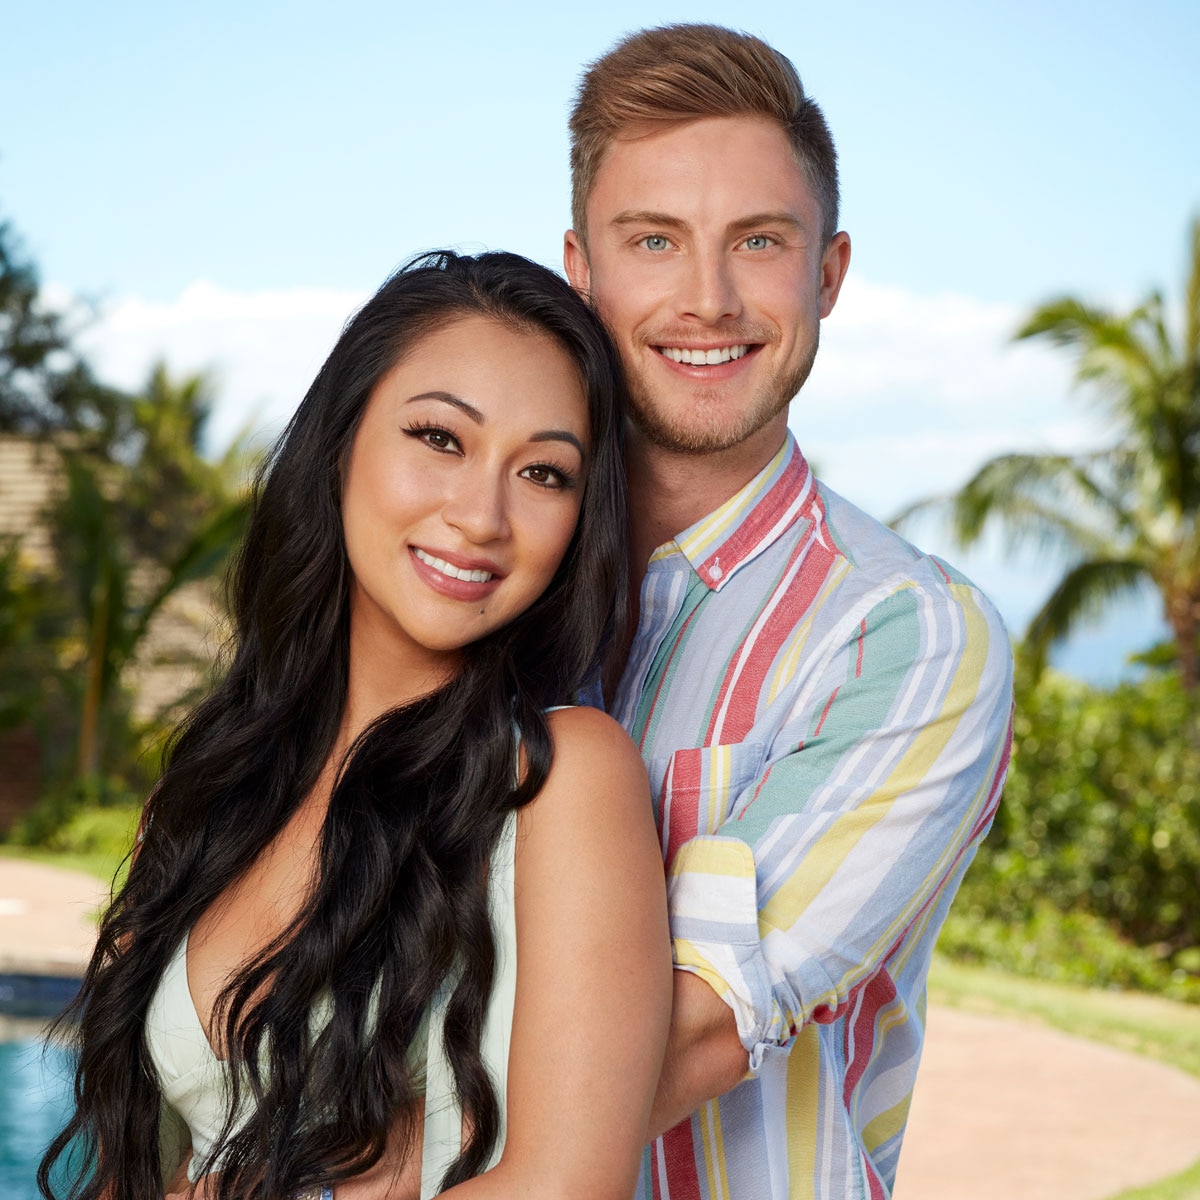 Meet the Couples and Sexy Singles of Temptation Island Season 4 pic